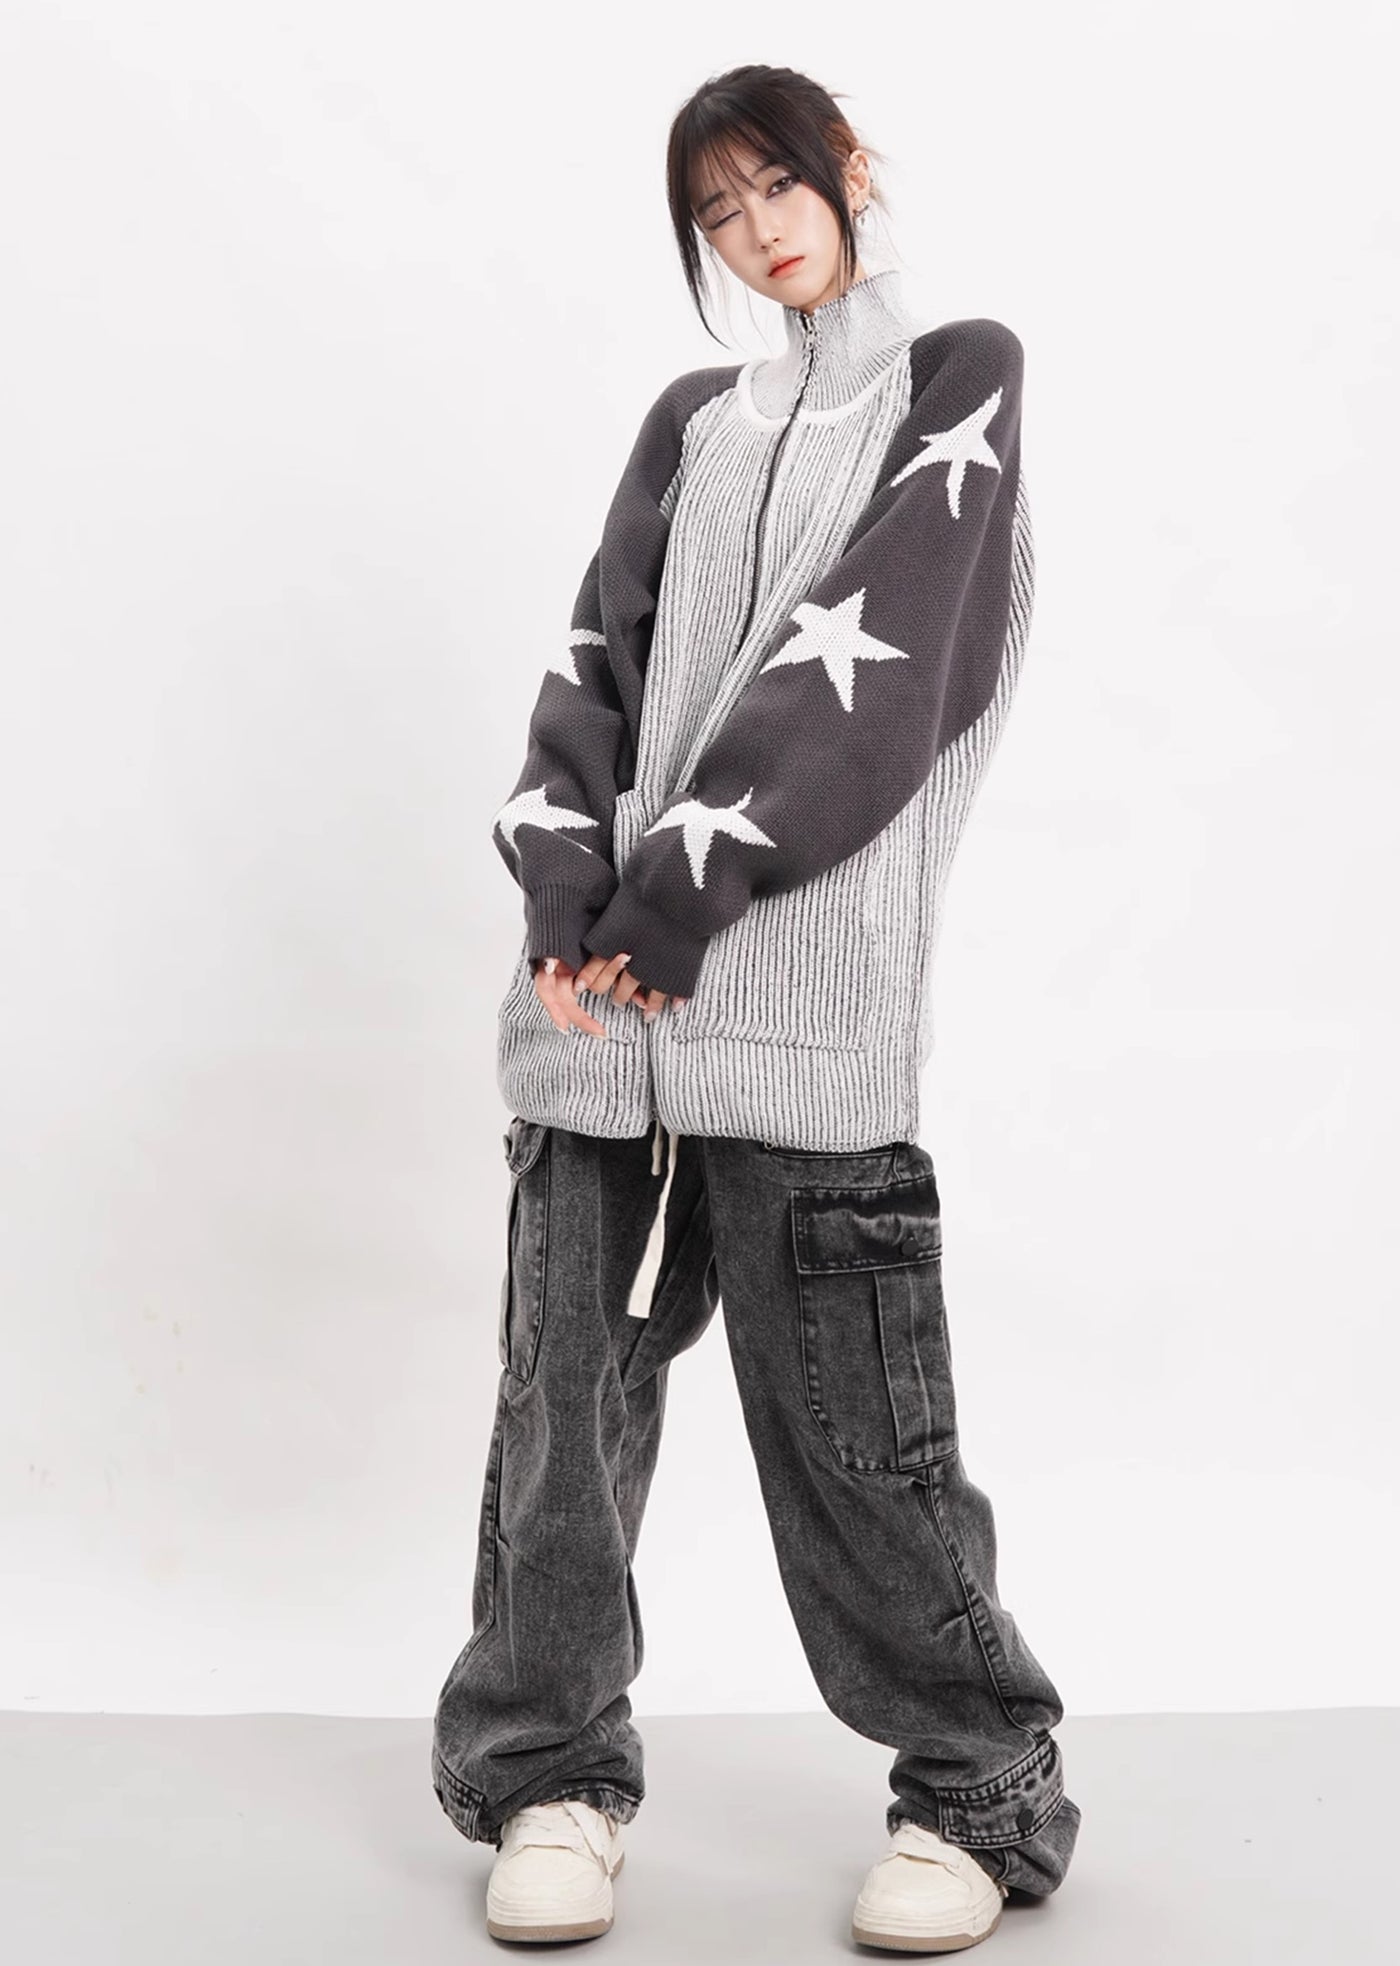 [4/29 New] Sleeve part star design tight silhouette design knit sweater HL3035